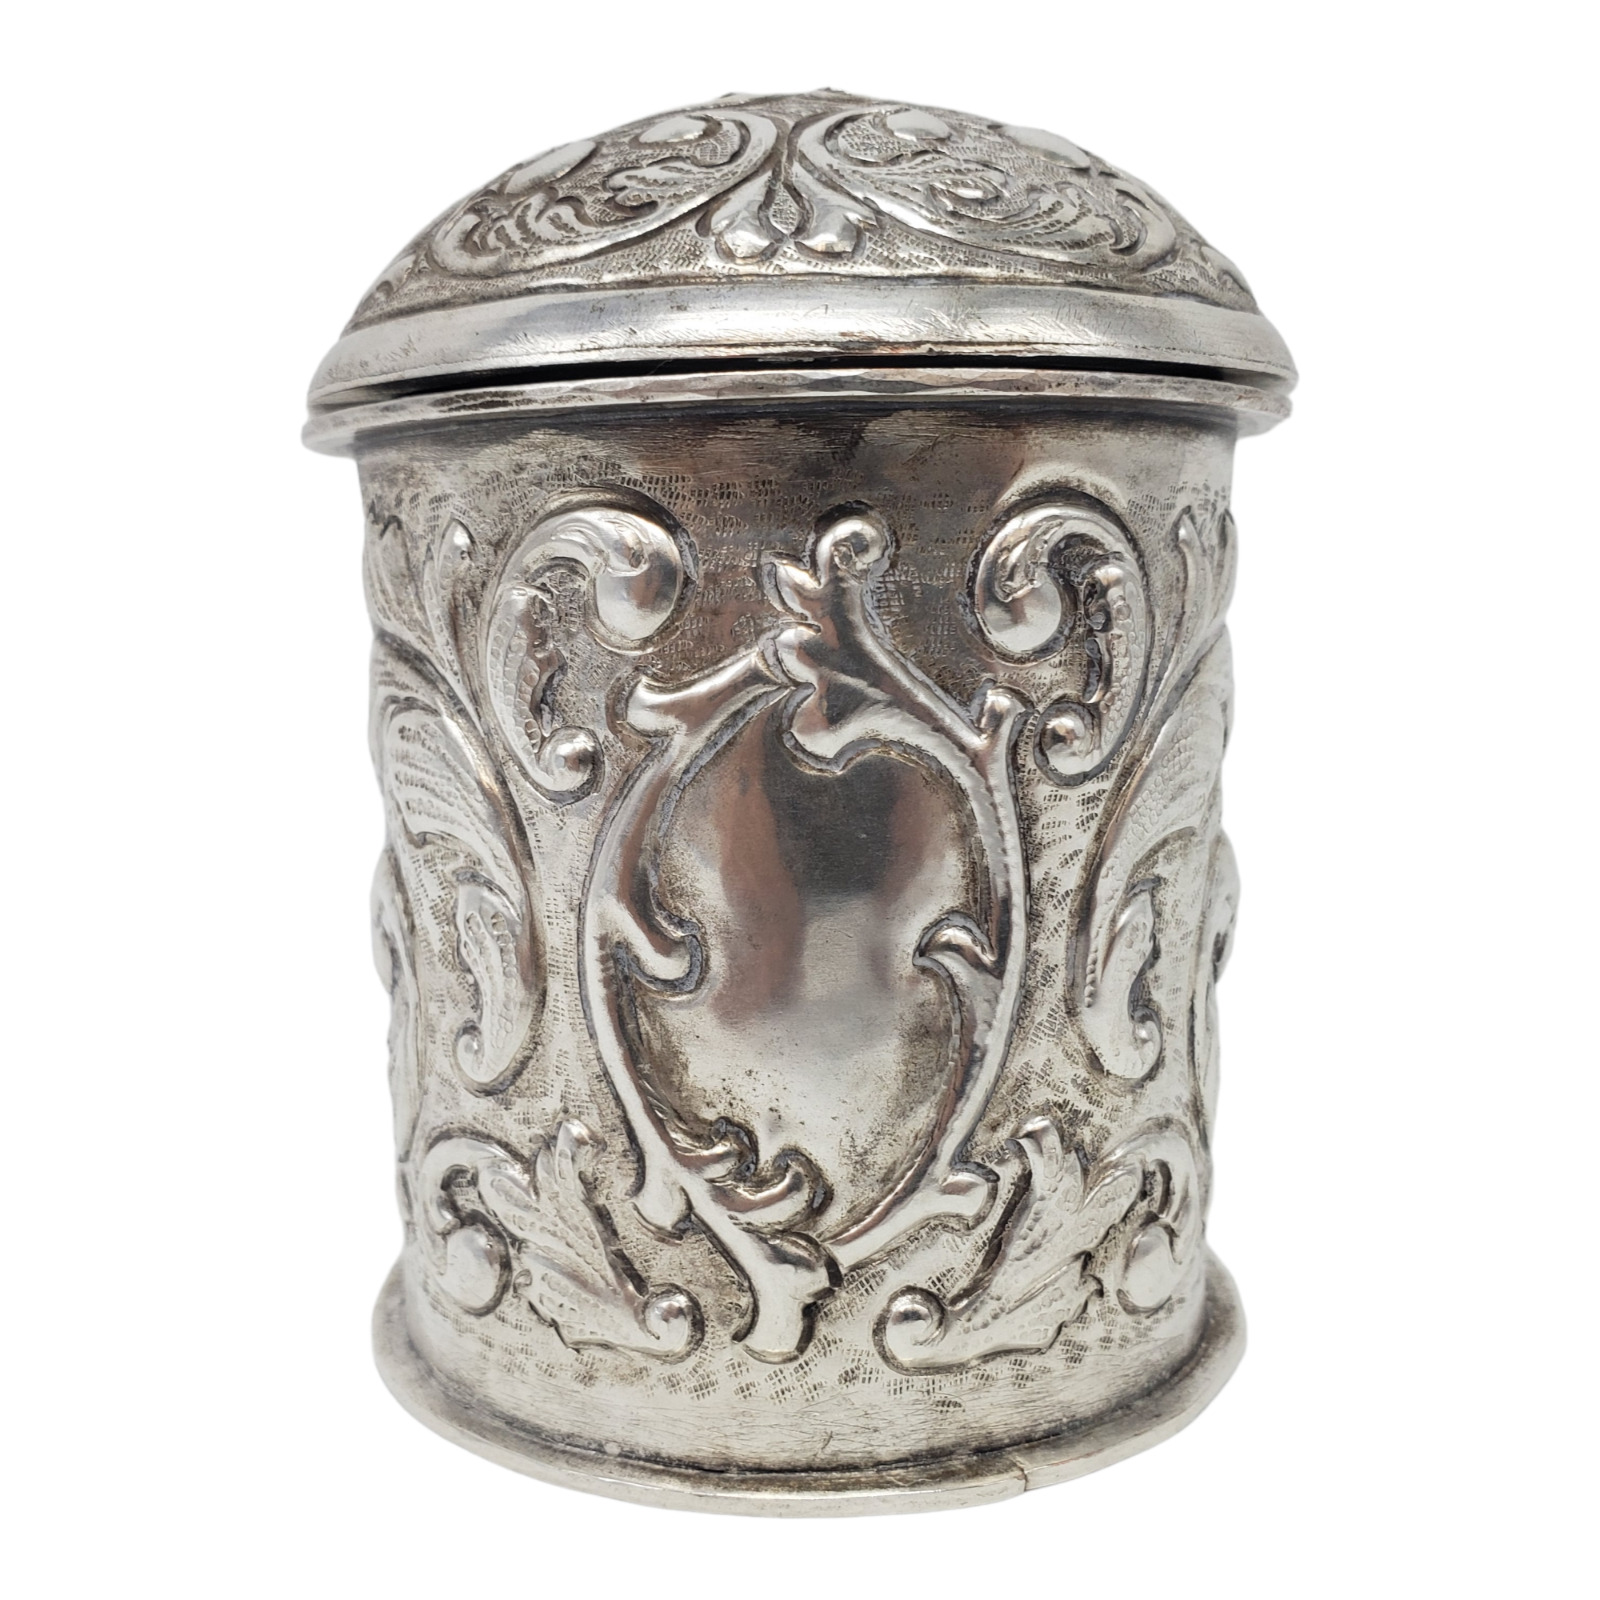 Antique 1800-1910 Silver Plated Repousse Vanity Jar Vessel Ornate  4X3 READ